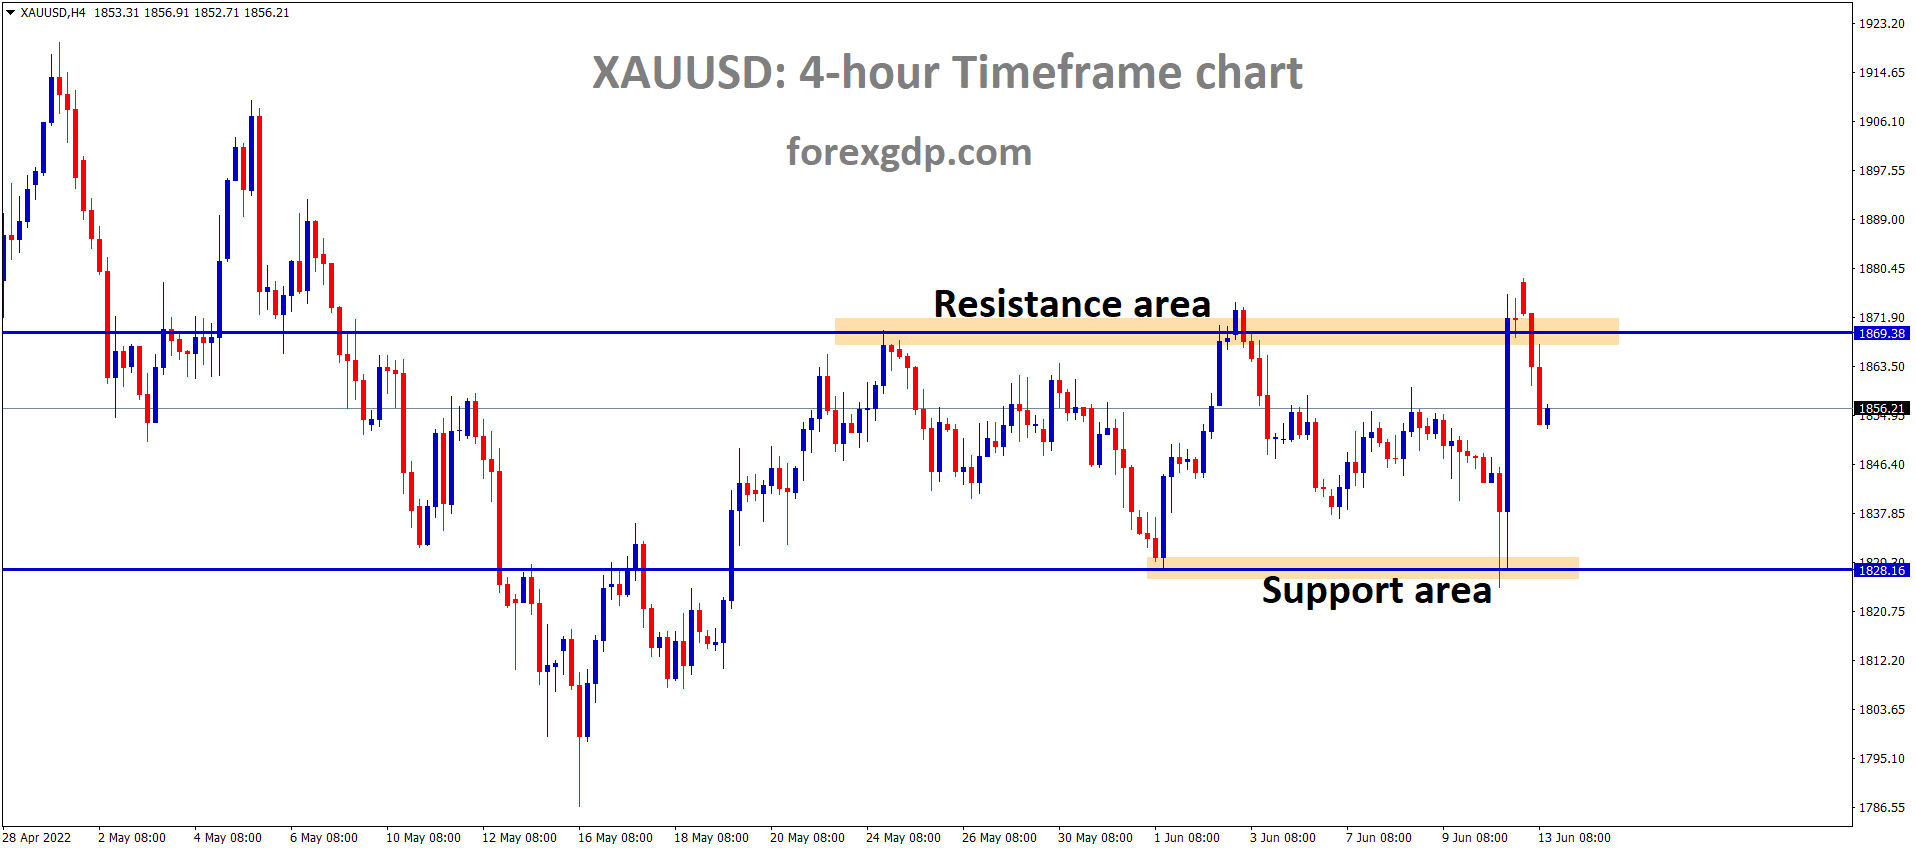 XAUUSD Gold price is moving in the Box Pattern and the Market has fallen from the Horizontal resistance area of the Pattern.